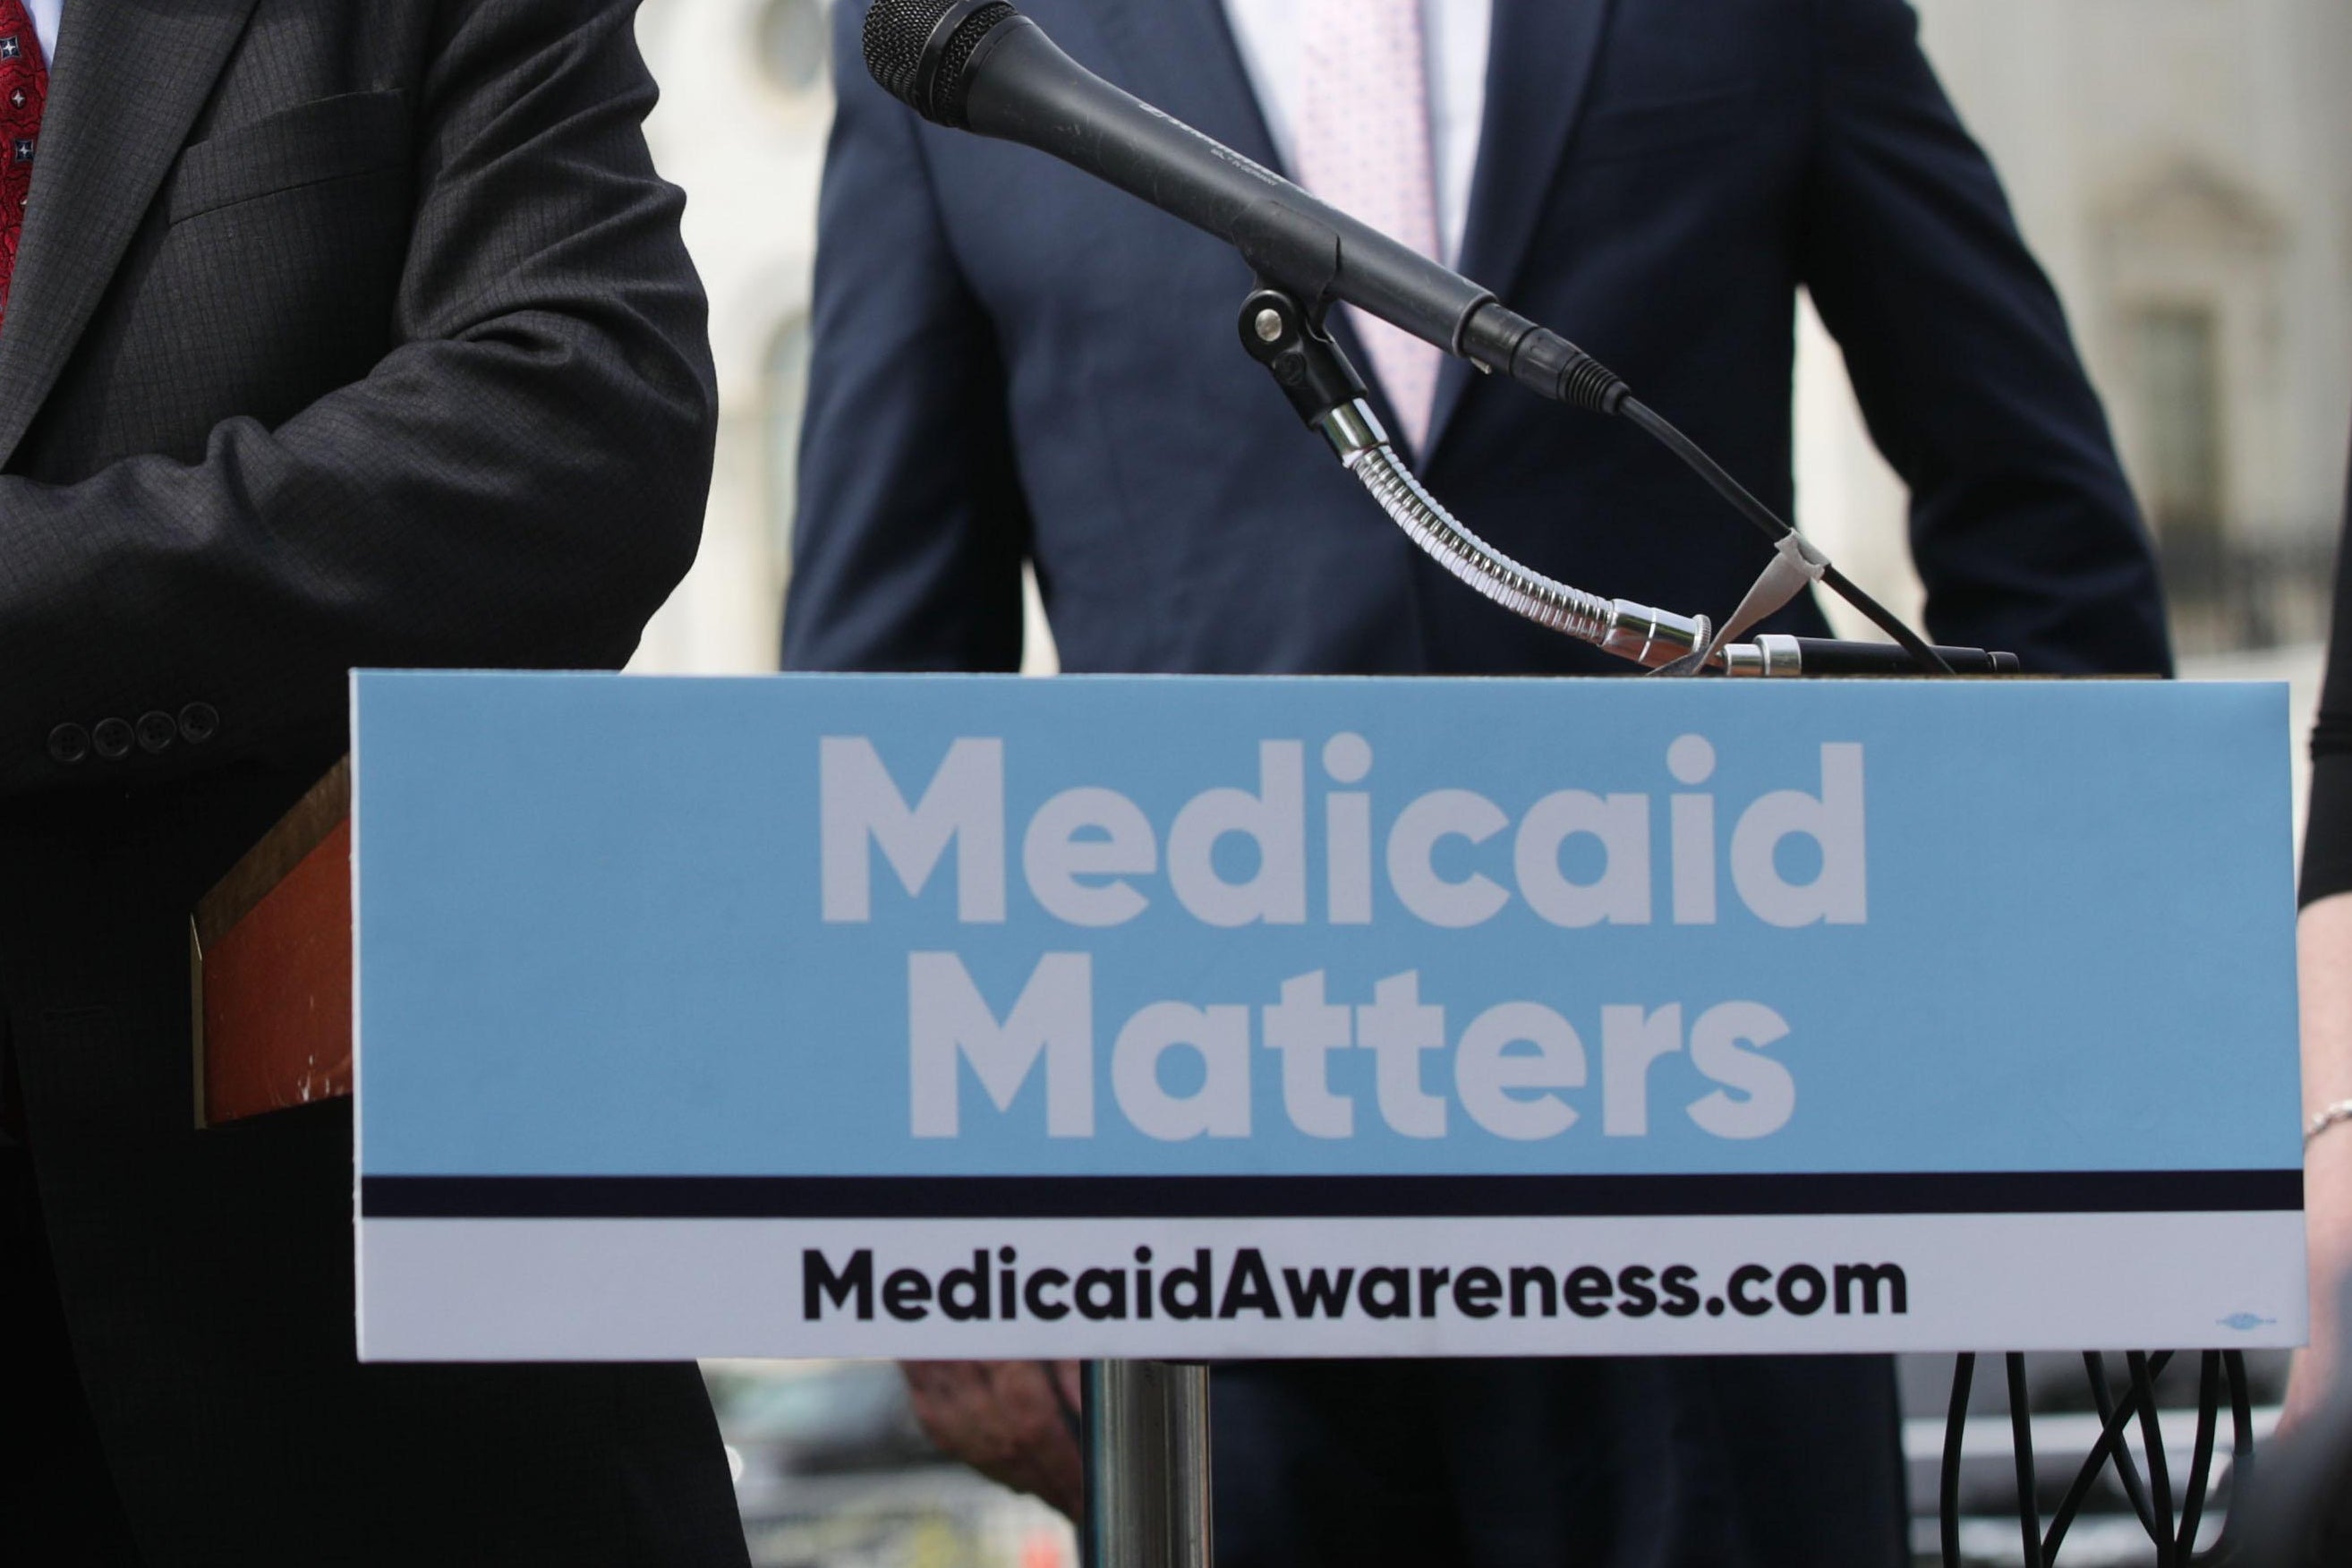 A sign on a podium says, "Medicaid Matters."